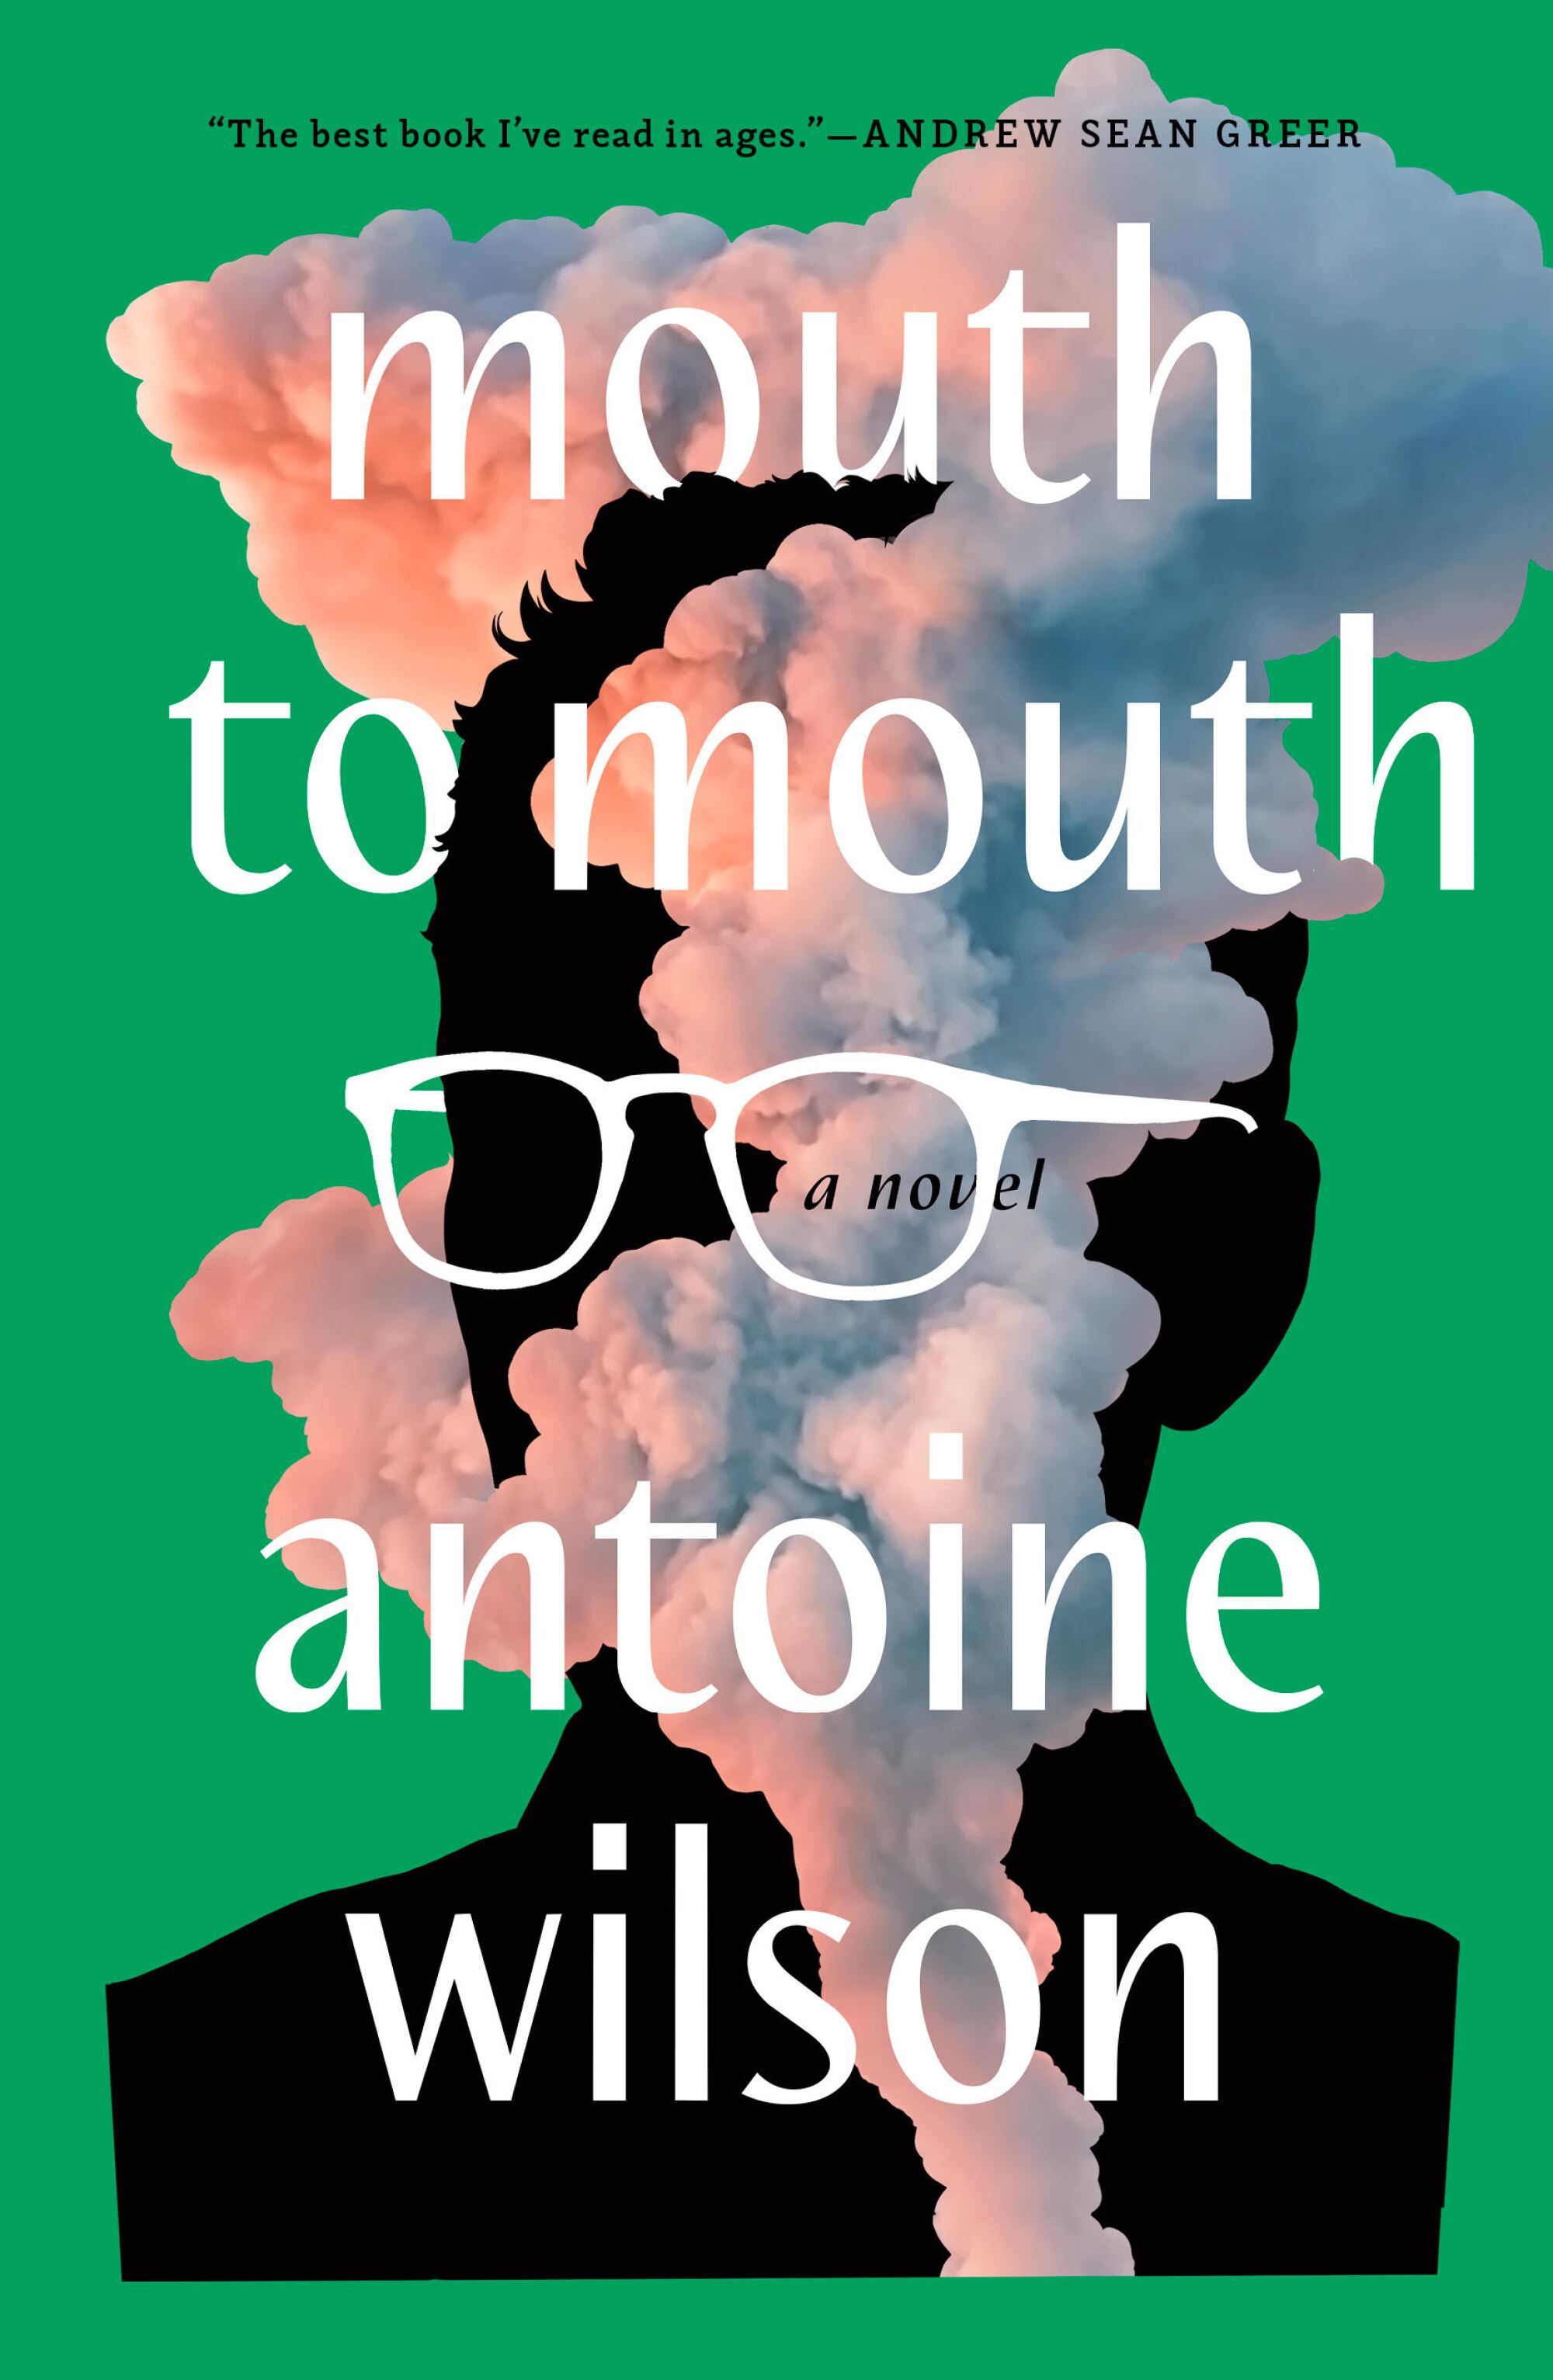 Clouds on a black silhouette wearing white glasses on the cover of "Mouth to mouth," by Antoine Wilson